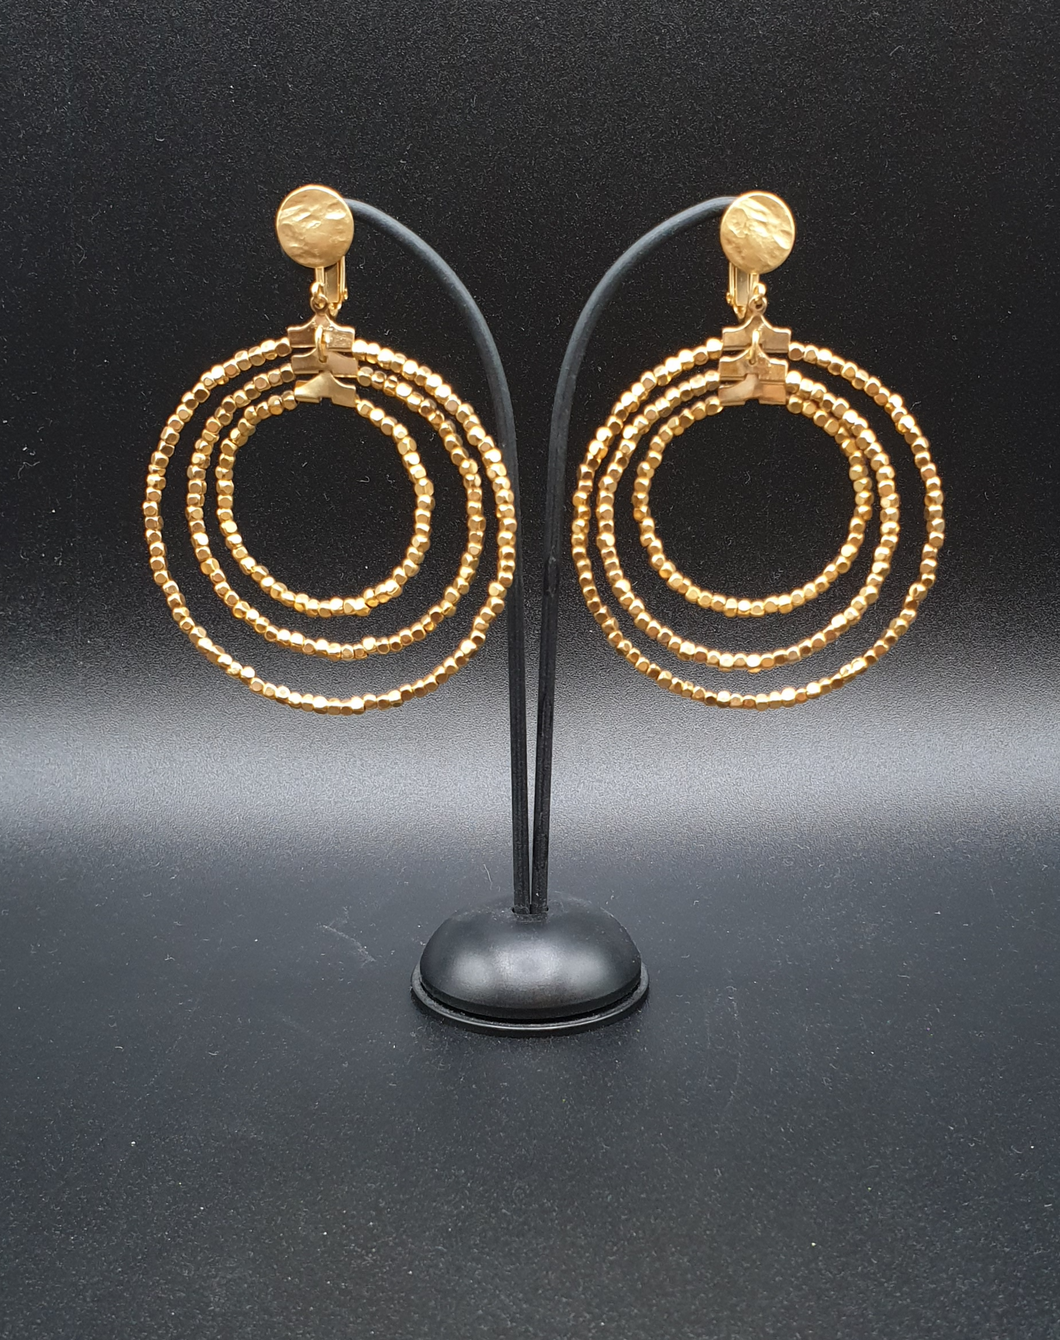 golden metal clip-on earrings with gold plated beads in three circles